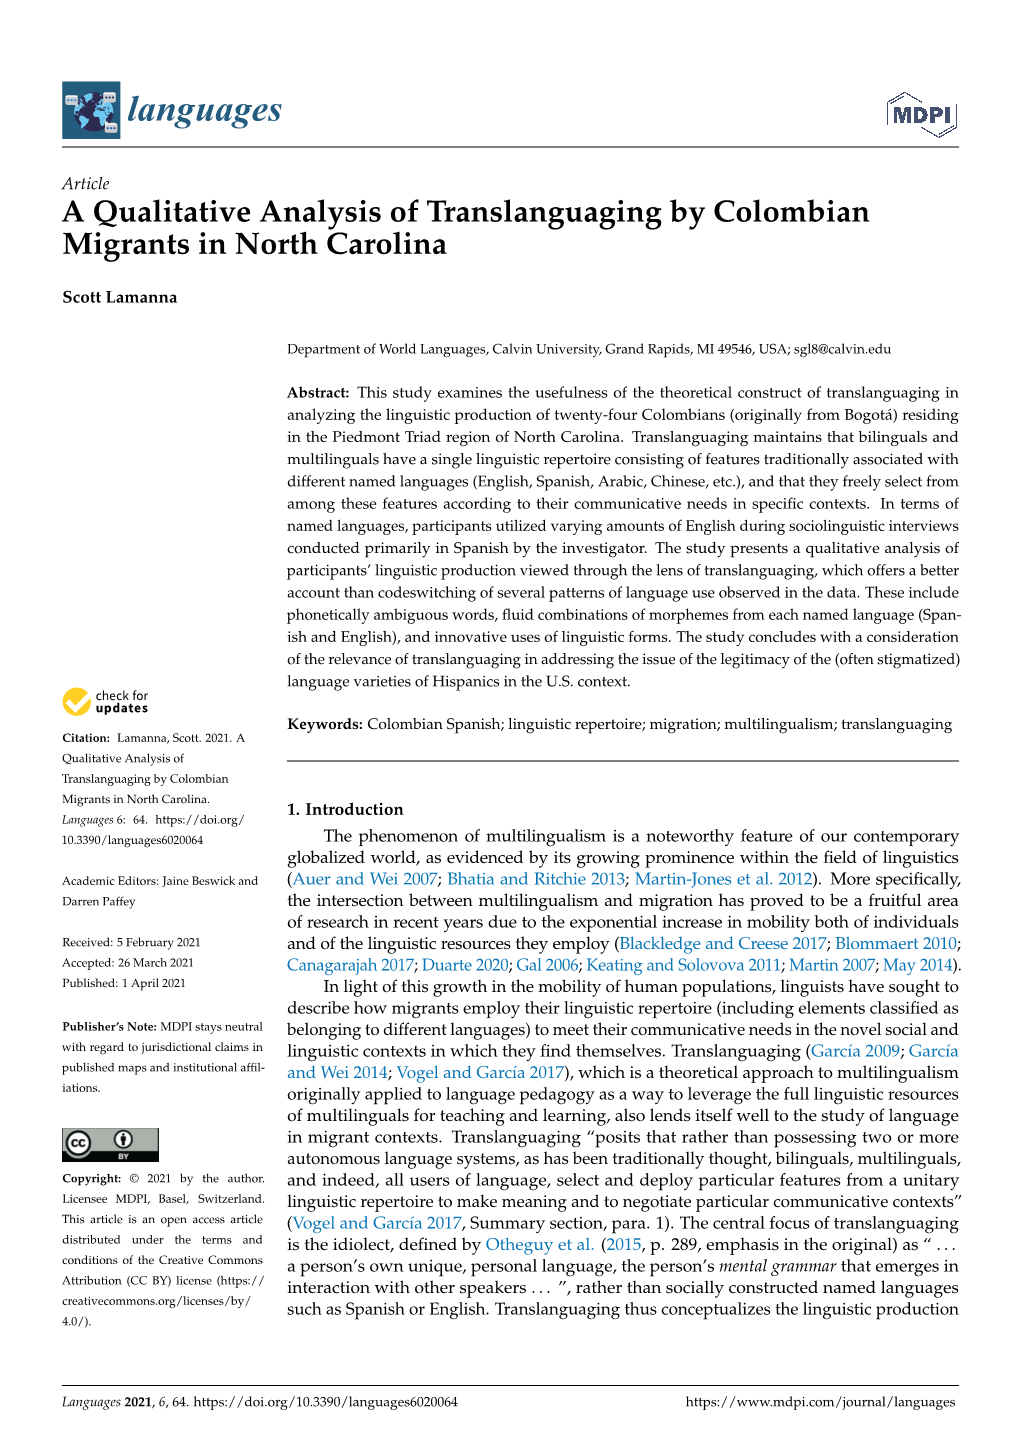 A Qualitative Analysis of Translanguaging by Colombian Migrants in North Carolina